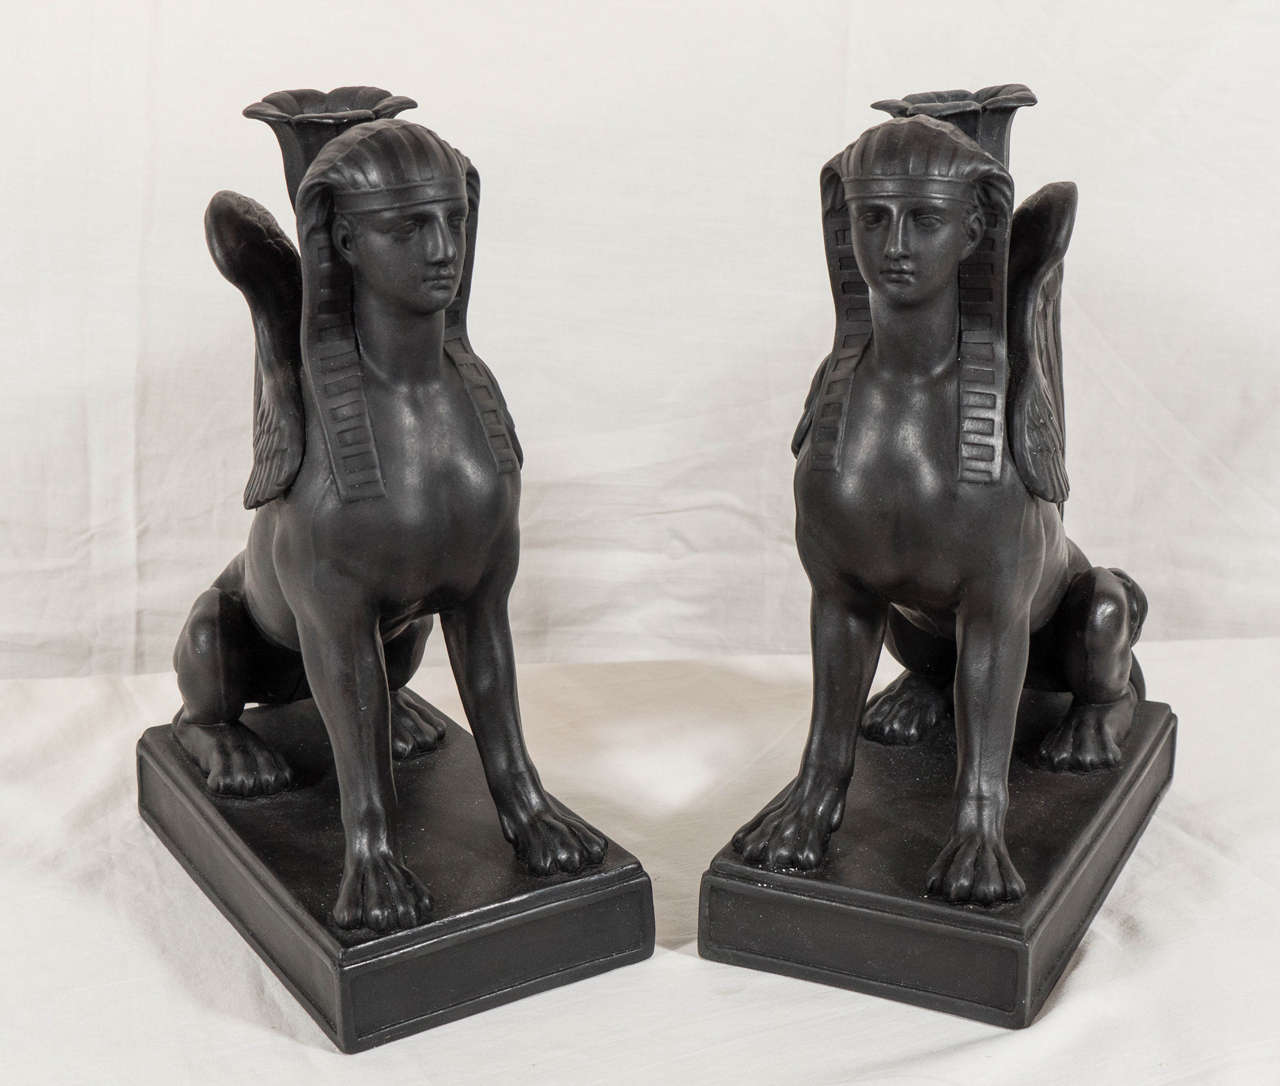 A pair of Wedgwood black basalt candlesticks in the form of sphinxes, each modeled seated upright atop a raised rectangular base with 'lotus' nozzle to hold candles. They have the head of a woman, the body of a lion and a pair of wings. This form